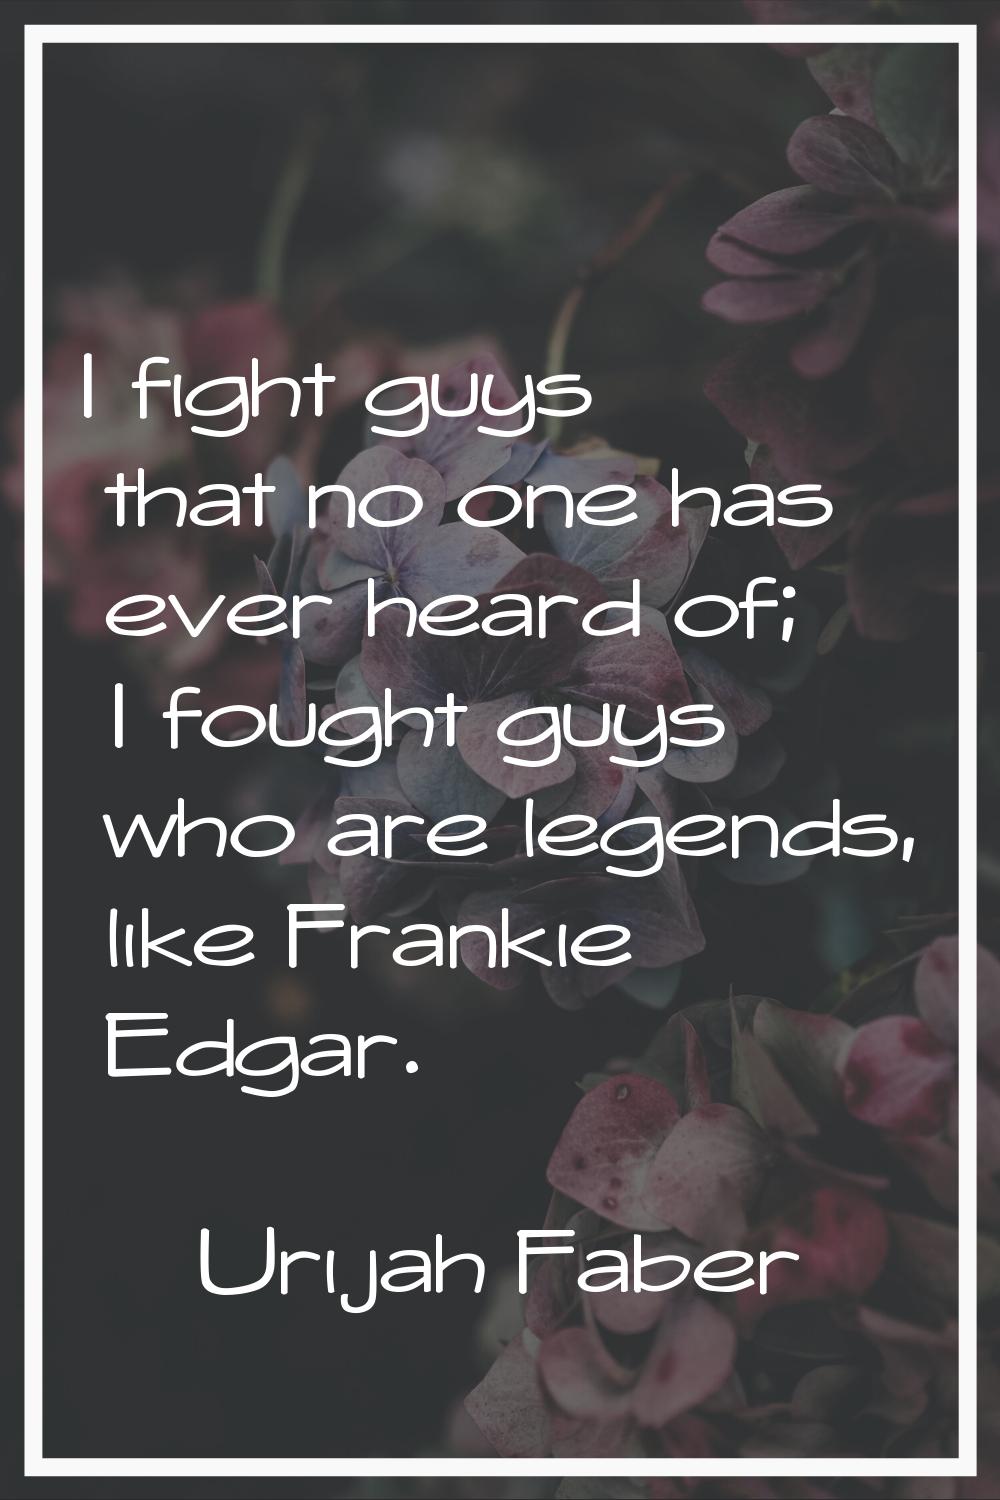 I fight guys that no one has ever heard of; I fought guys who are legends, like Frankie Edgar.